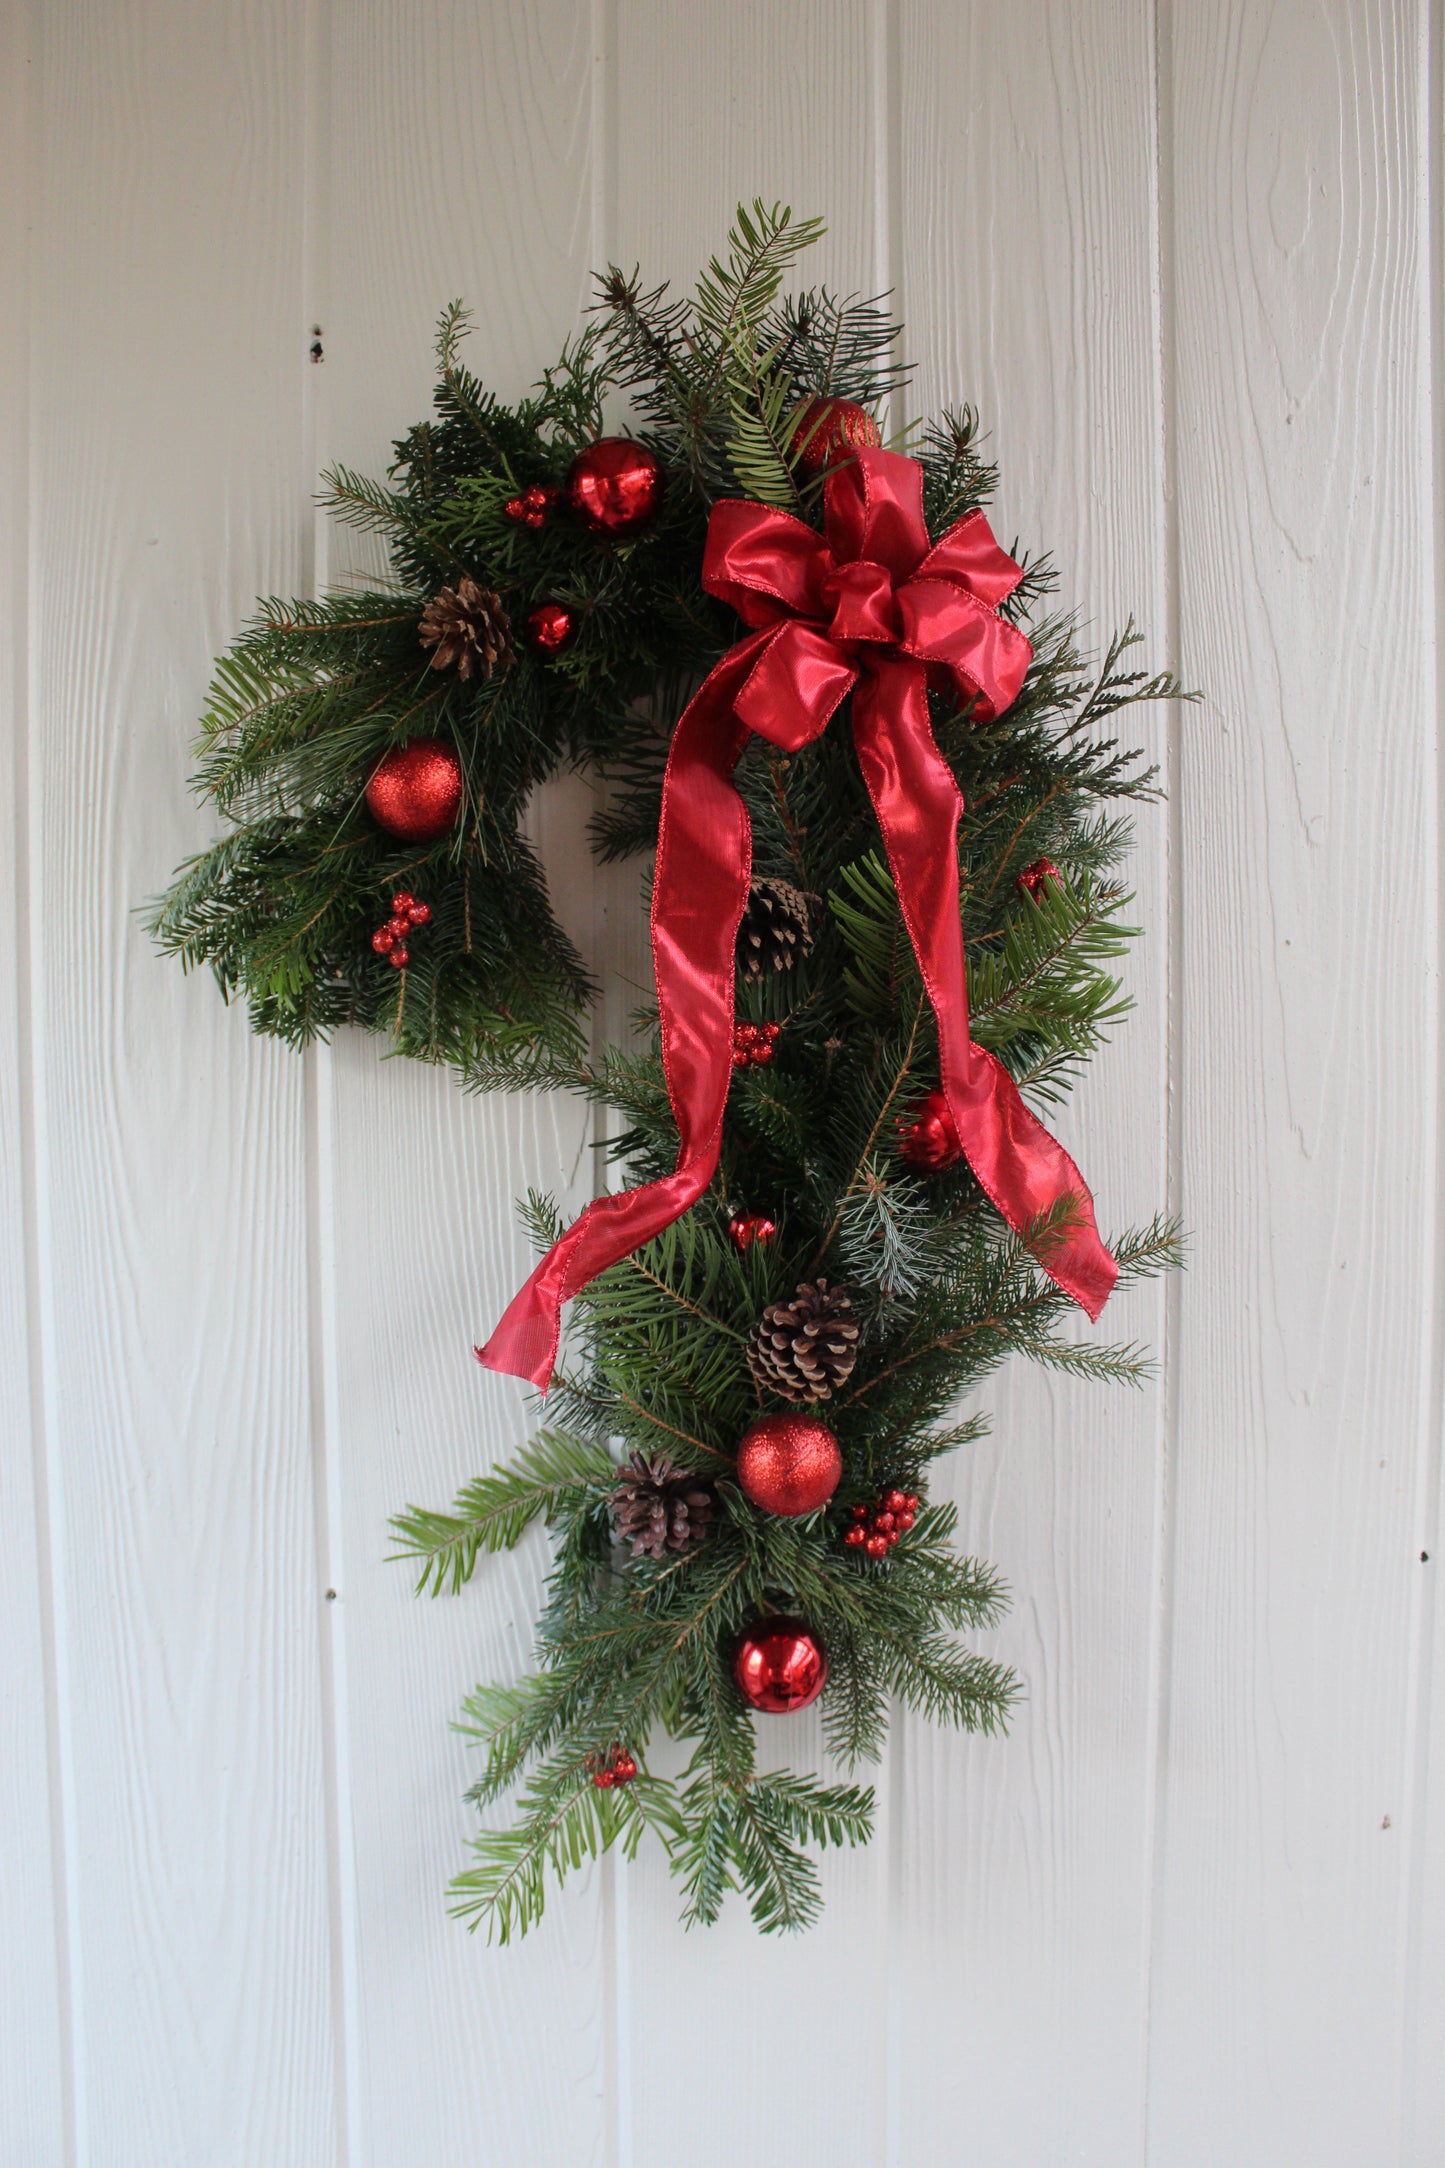 CLASS: Candy Cane Wreath, Mimosa, and Cookie SUN 12/10 11a-12:00p